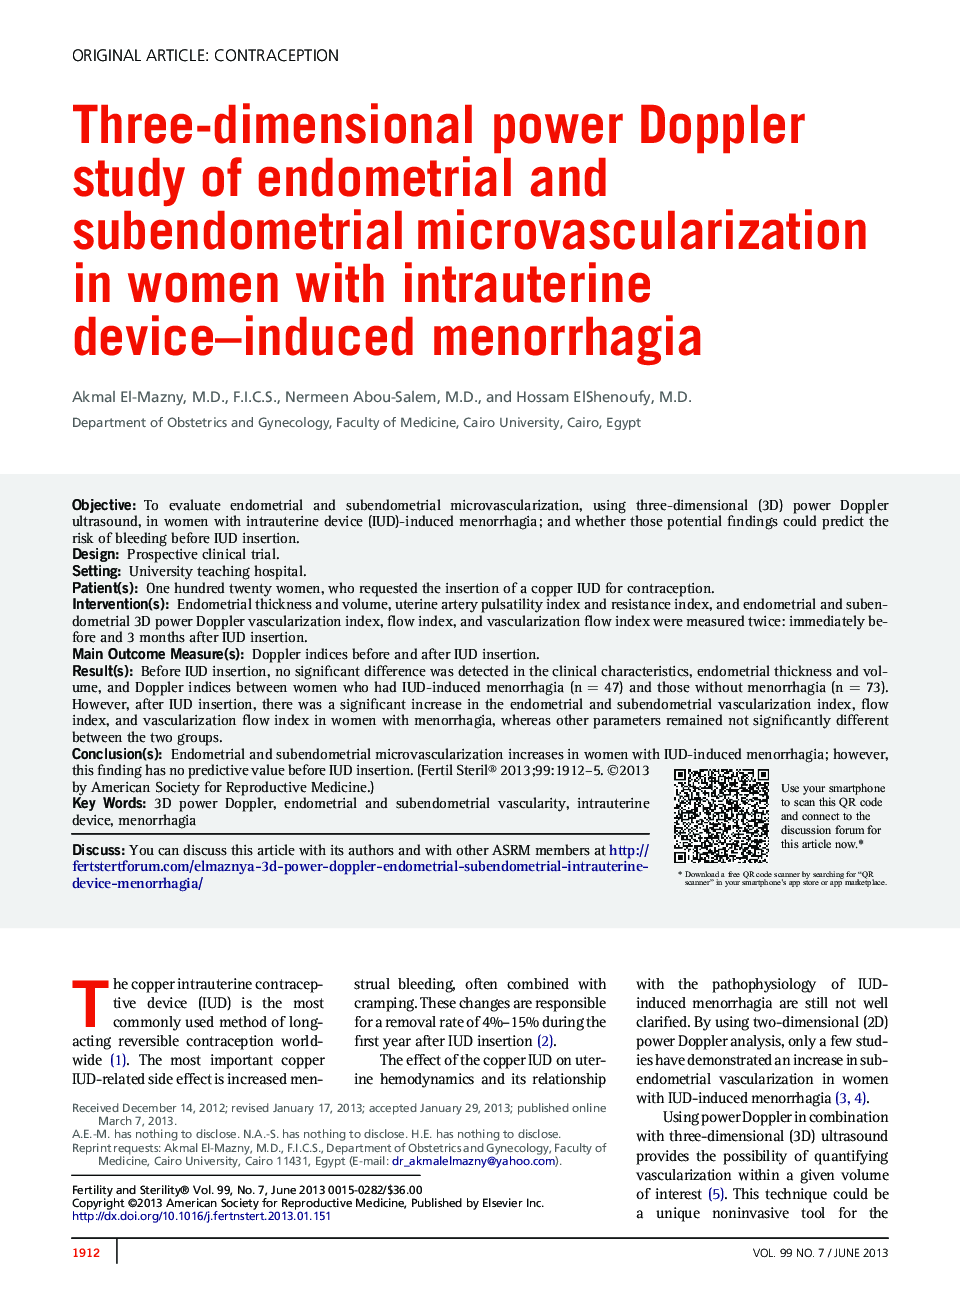 Three-dimensional power Doppler study of endometrial and subendometrial microvascularization in women with intrauterine device-induced menorrhagia